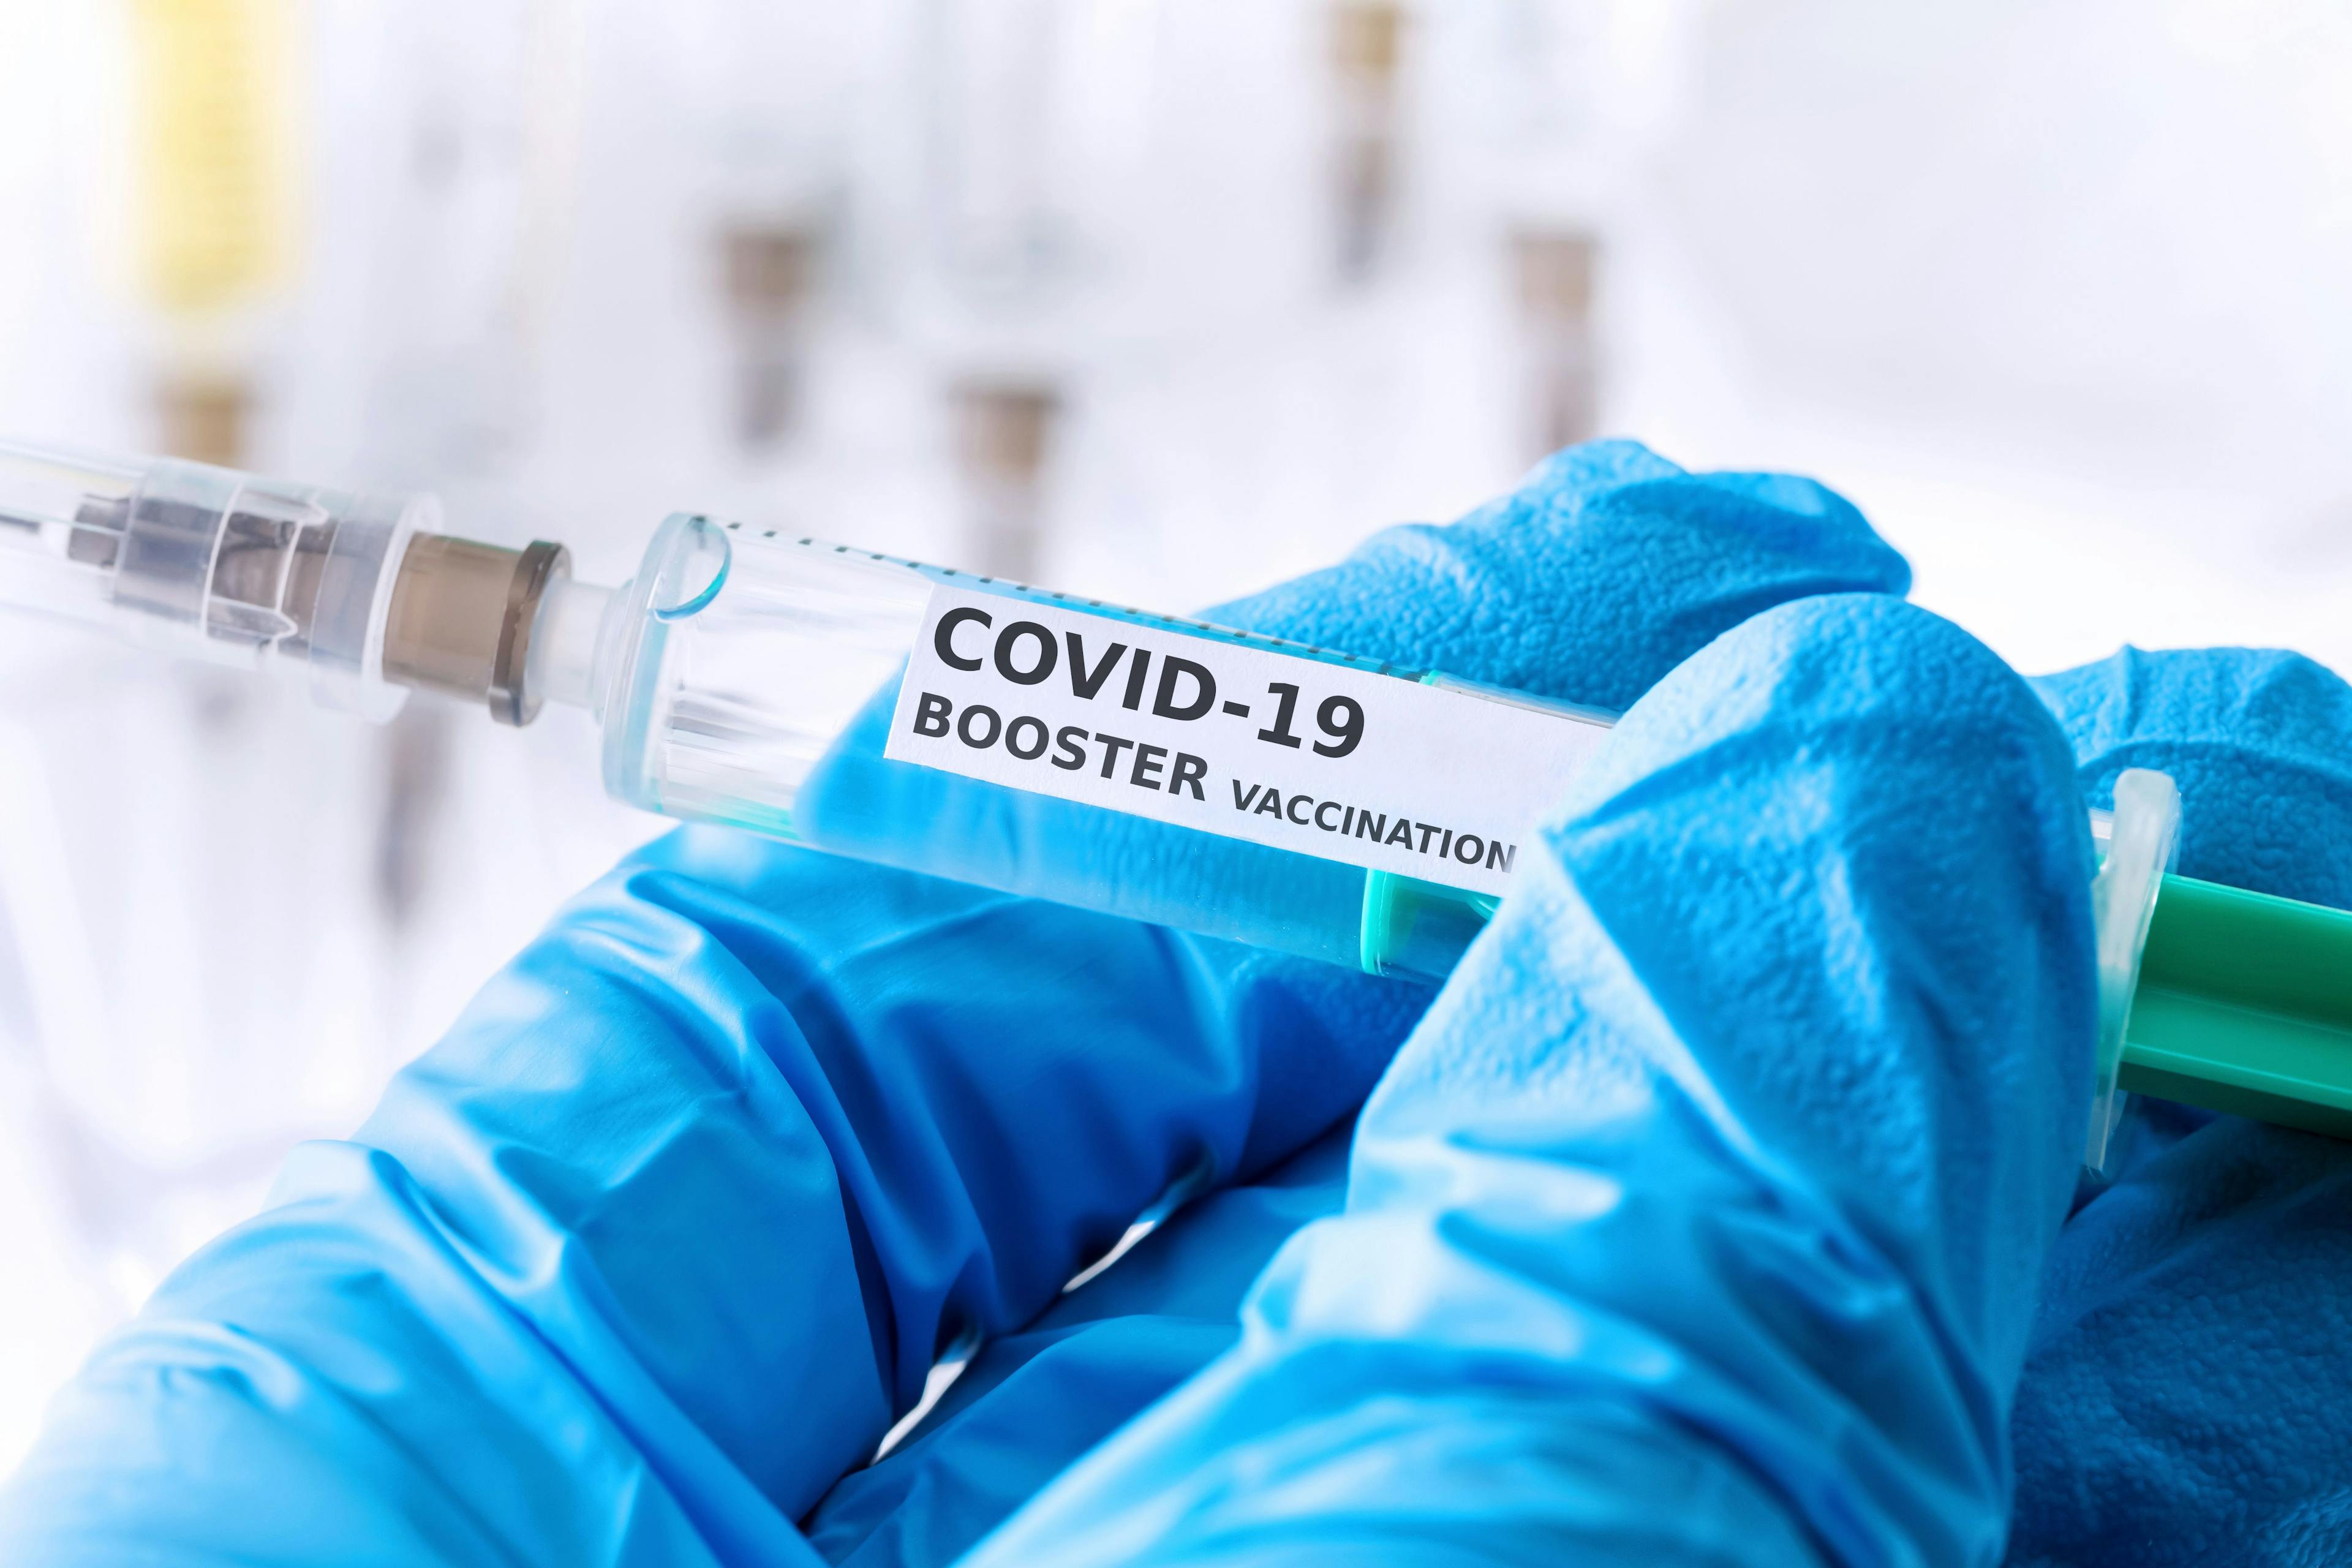 World Health Leaders Discuss Long-Term Strategy for COVID-19 Vaccines and Boosters